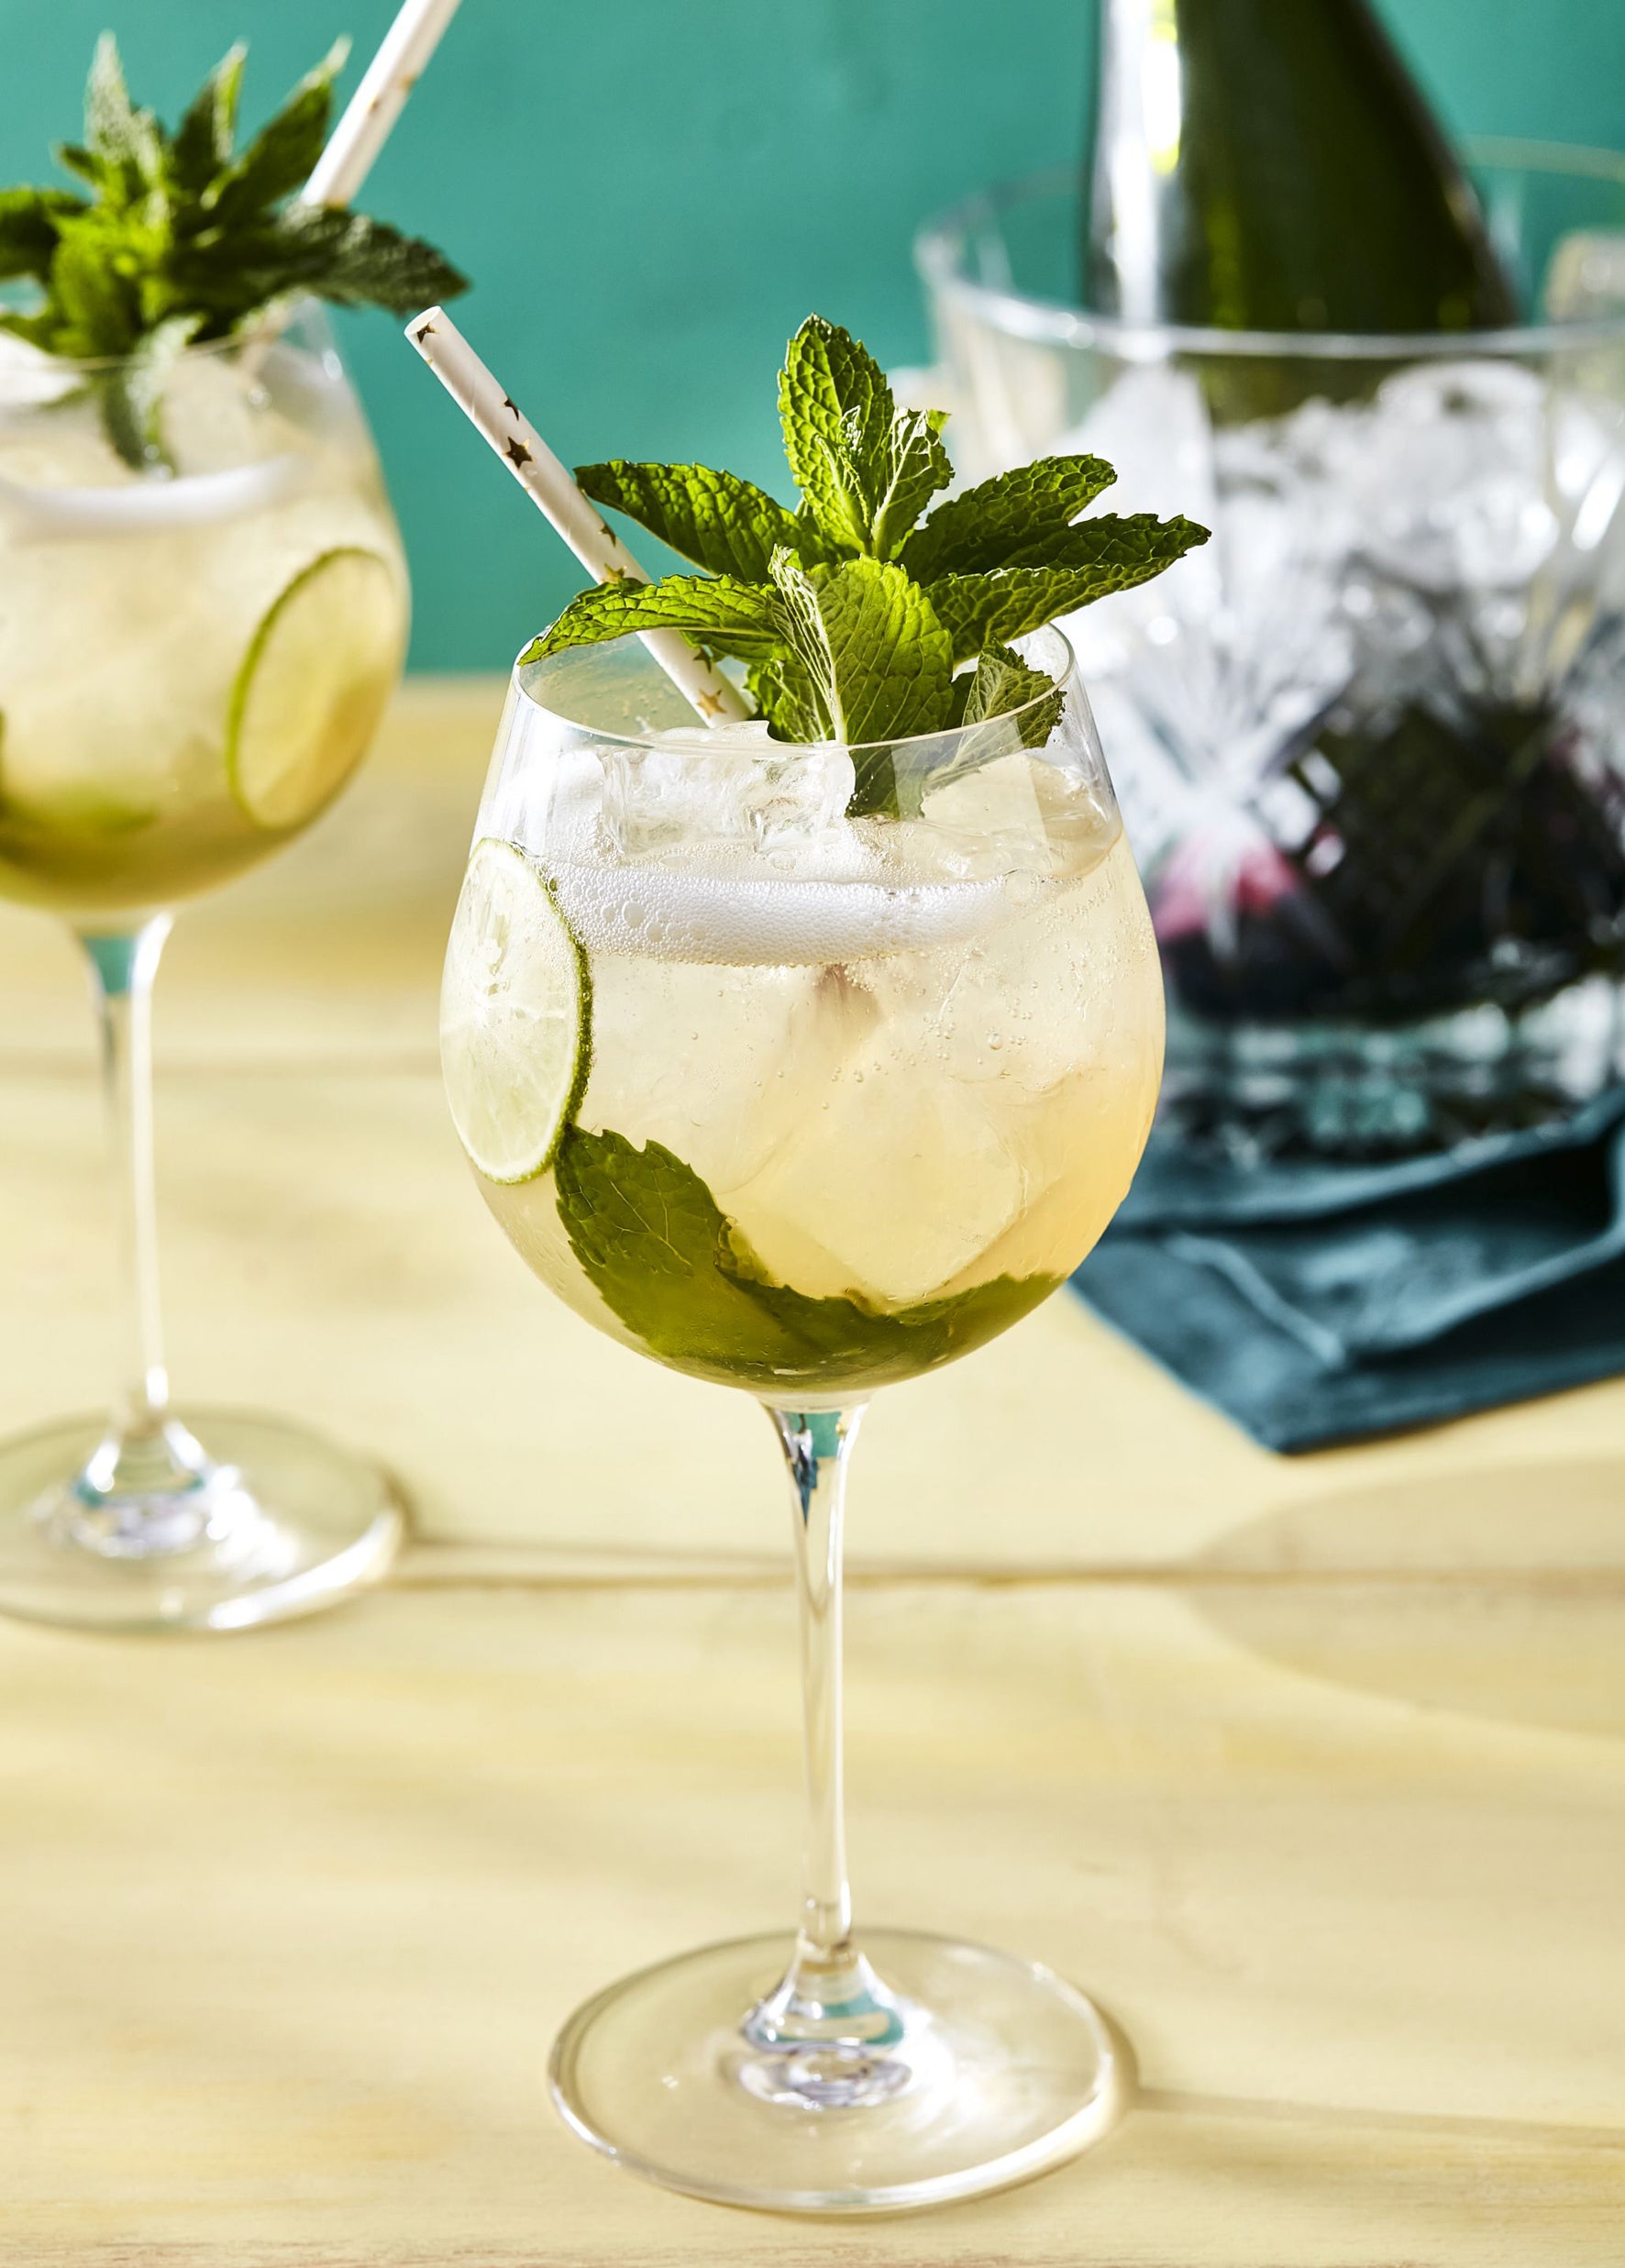 The Hugo is ideal for those who love lime, mint and elderflower